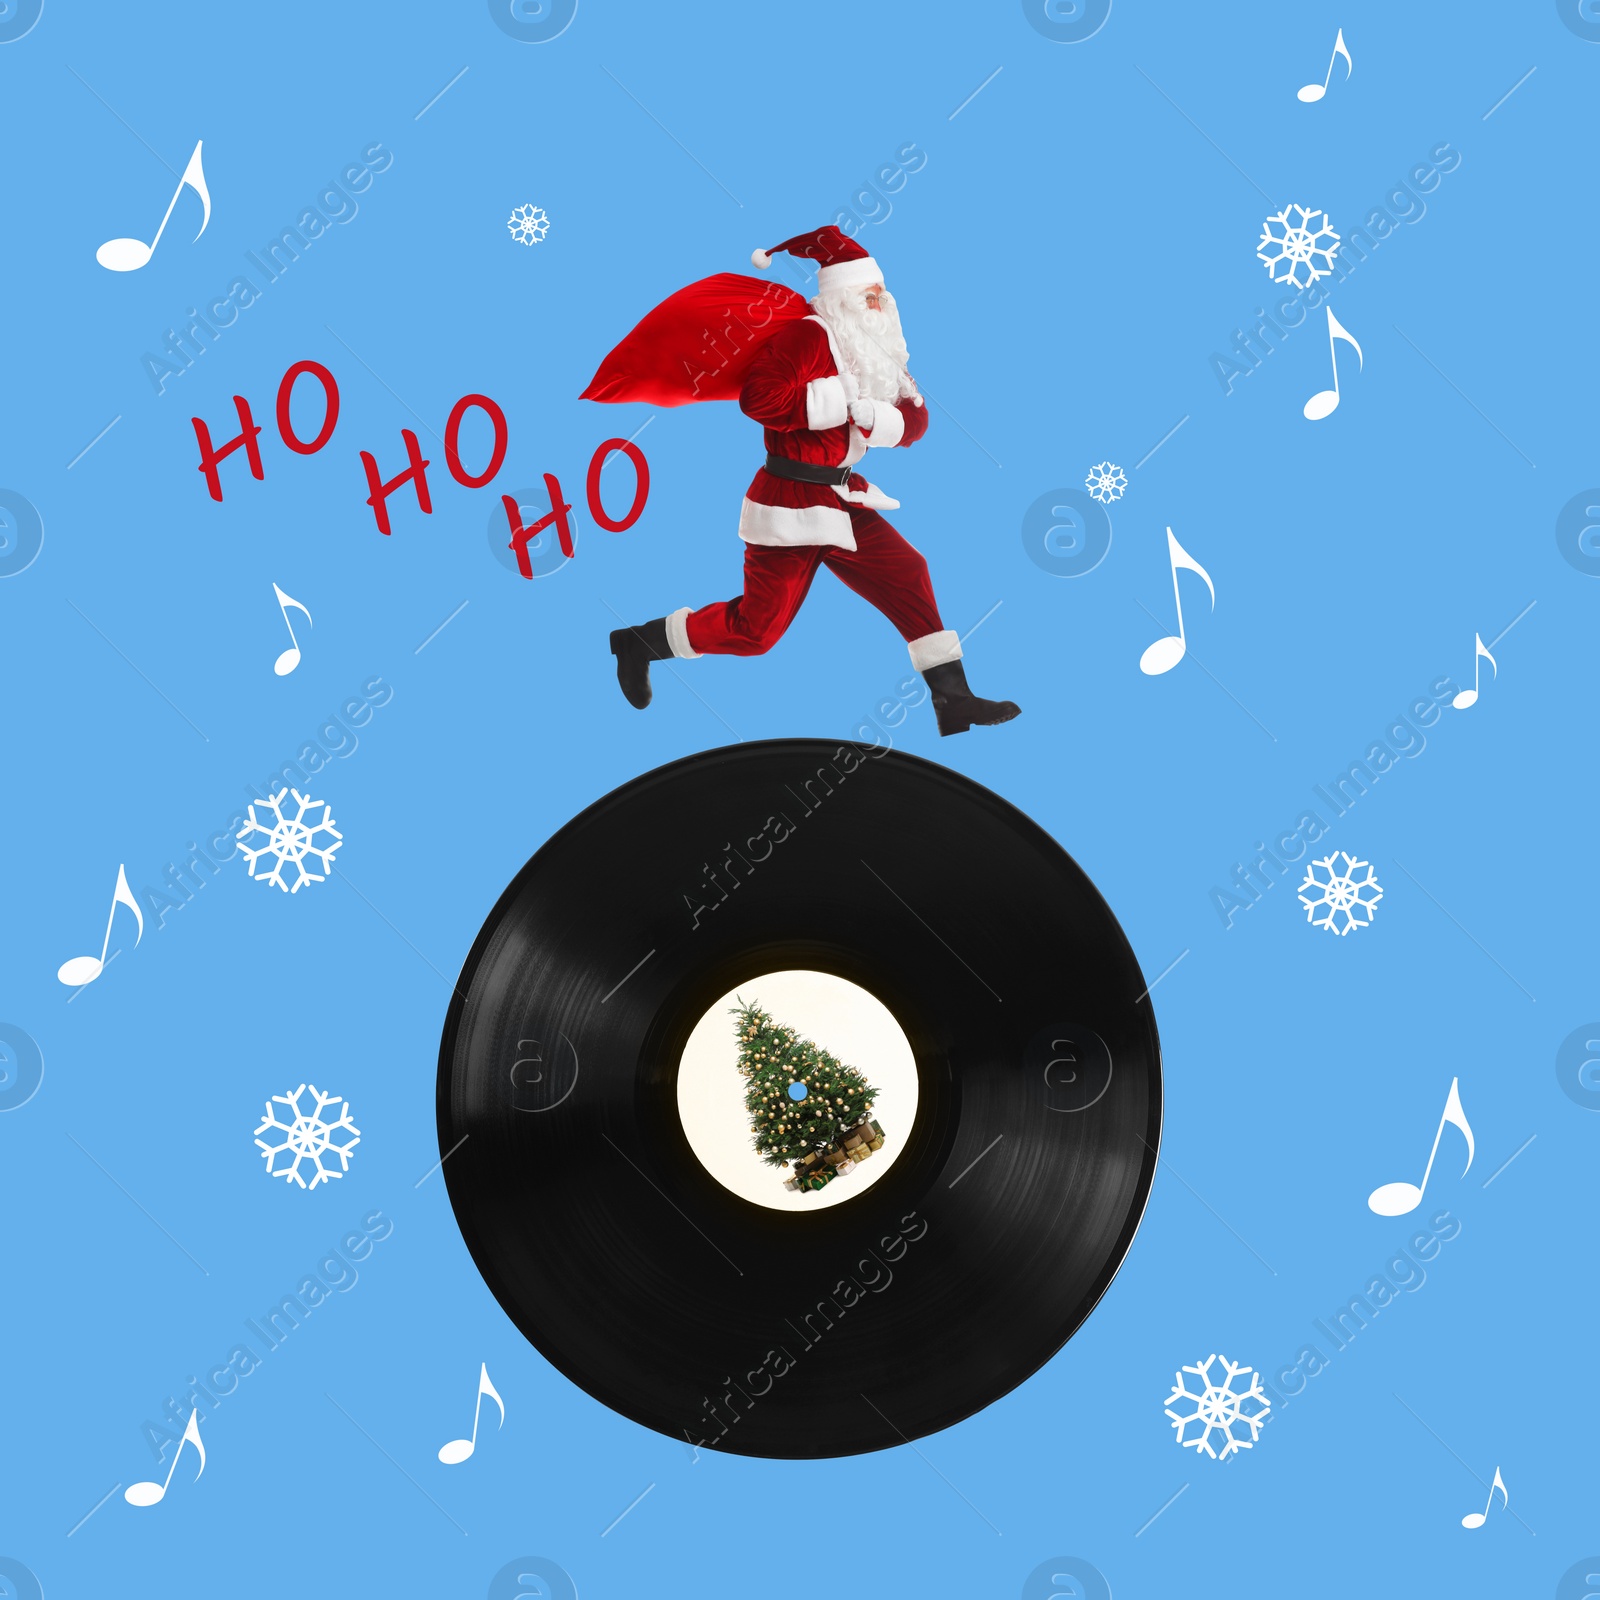 Image of Winter holidays bright artwork. Creative collage with Santa Claus running on vinyl record against light blue background